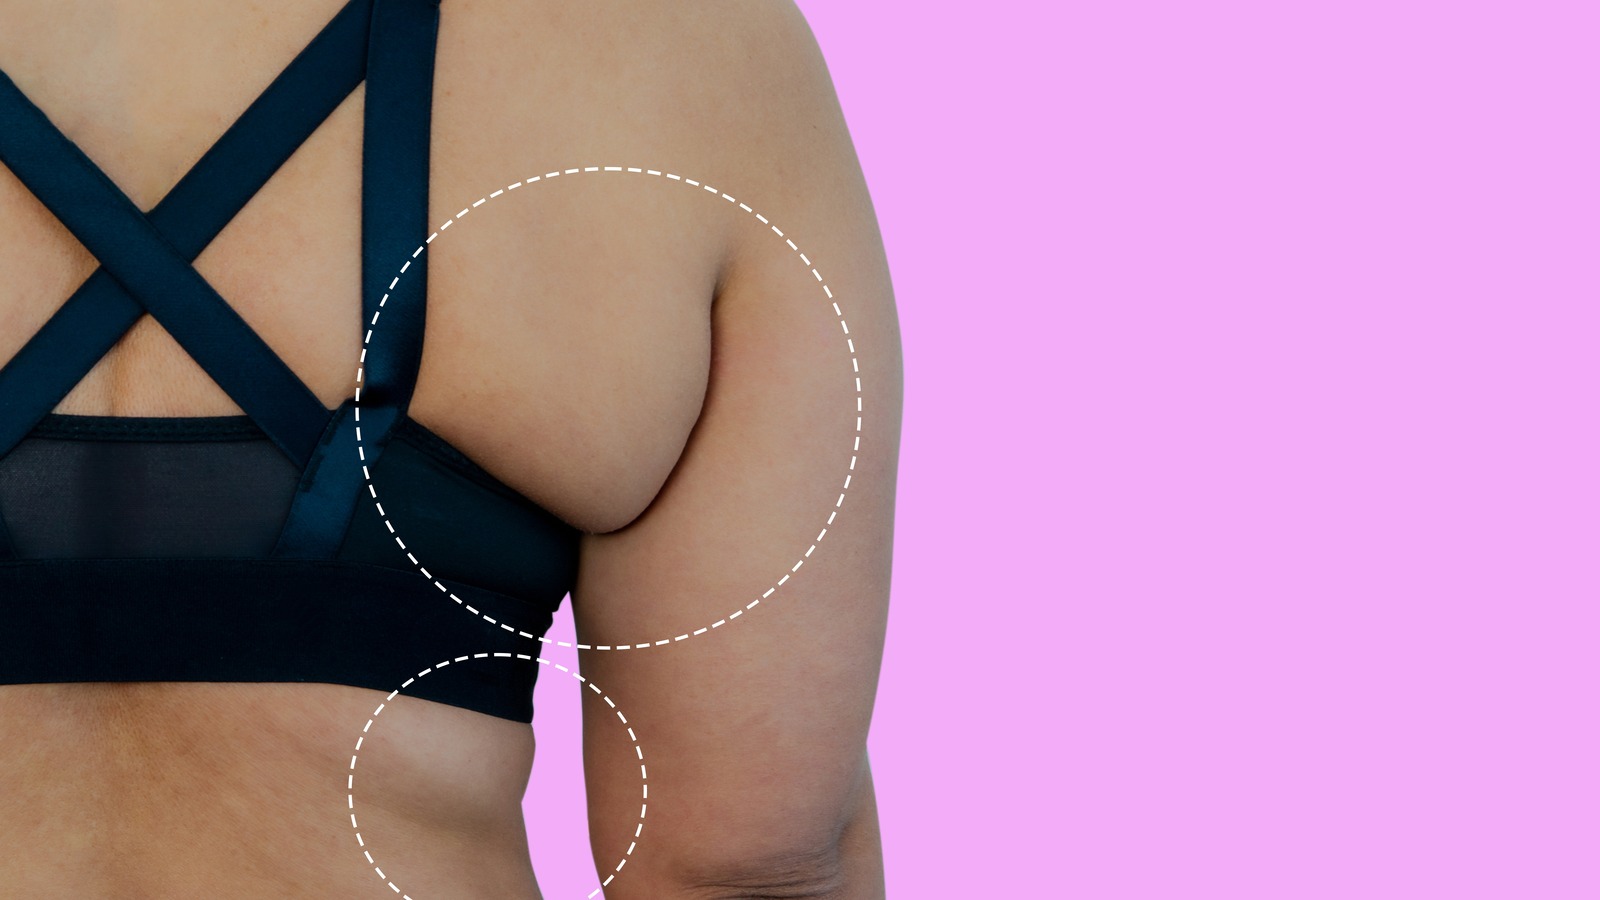 I'm an F-cup and hate wearing bras - people warn they will sag but they're  perkier than ever